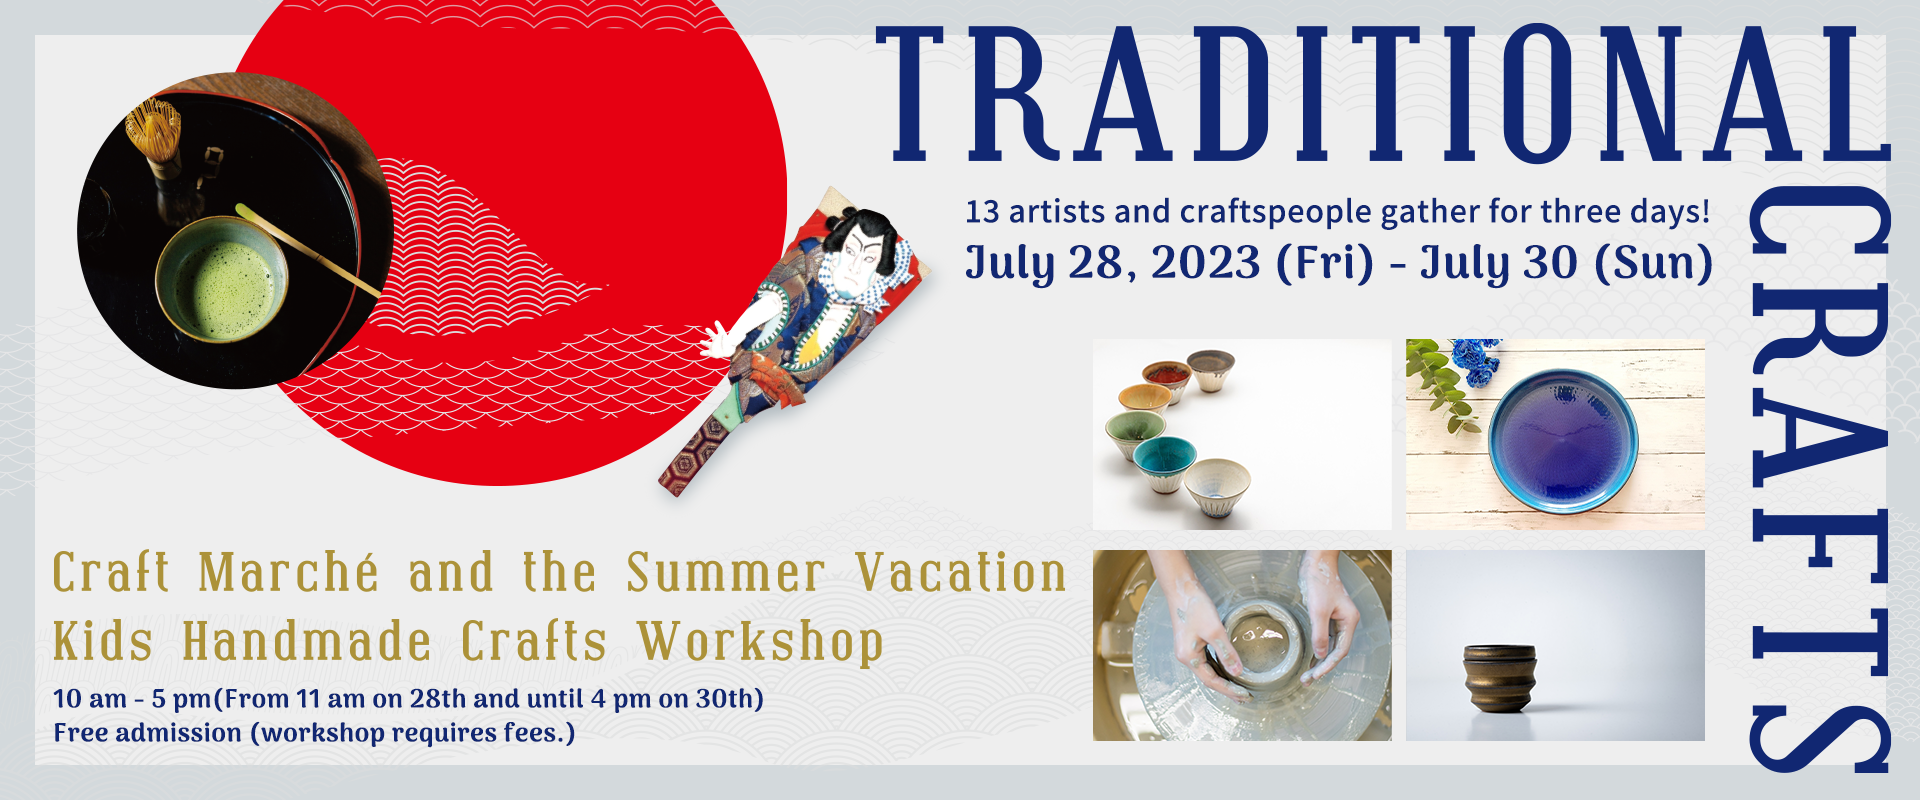 Craft Marché and the Summer Vacation Kids Handmade Crafts Workshop